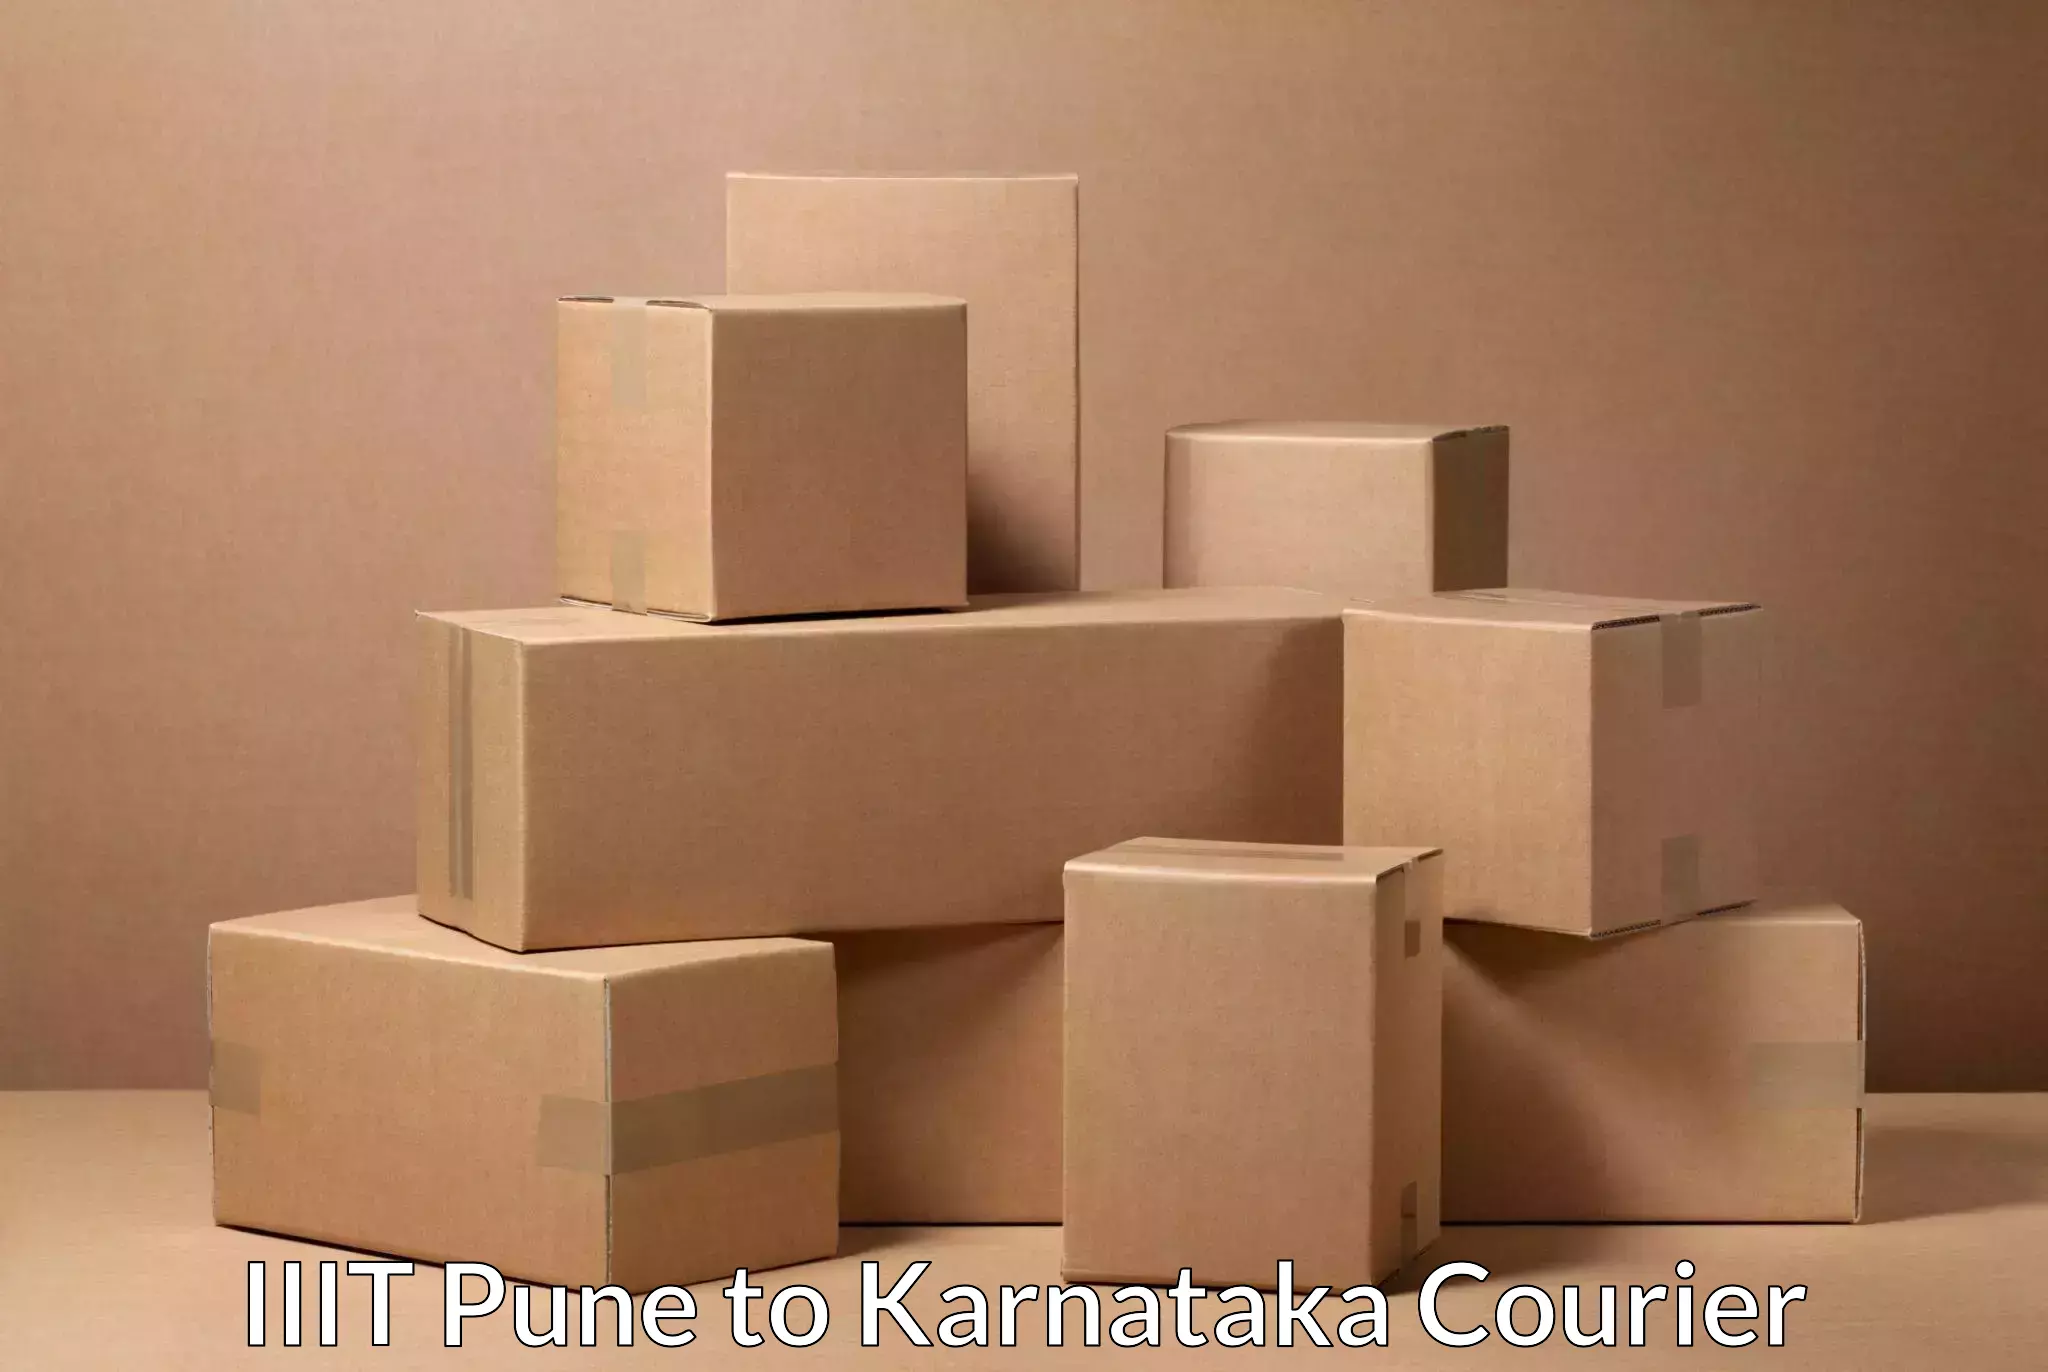 Personalized courier experiences IIIT Pune to Karnataka